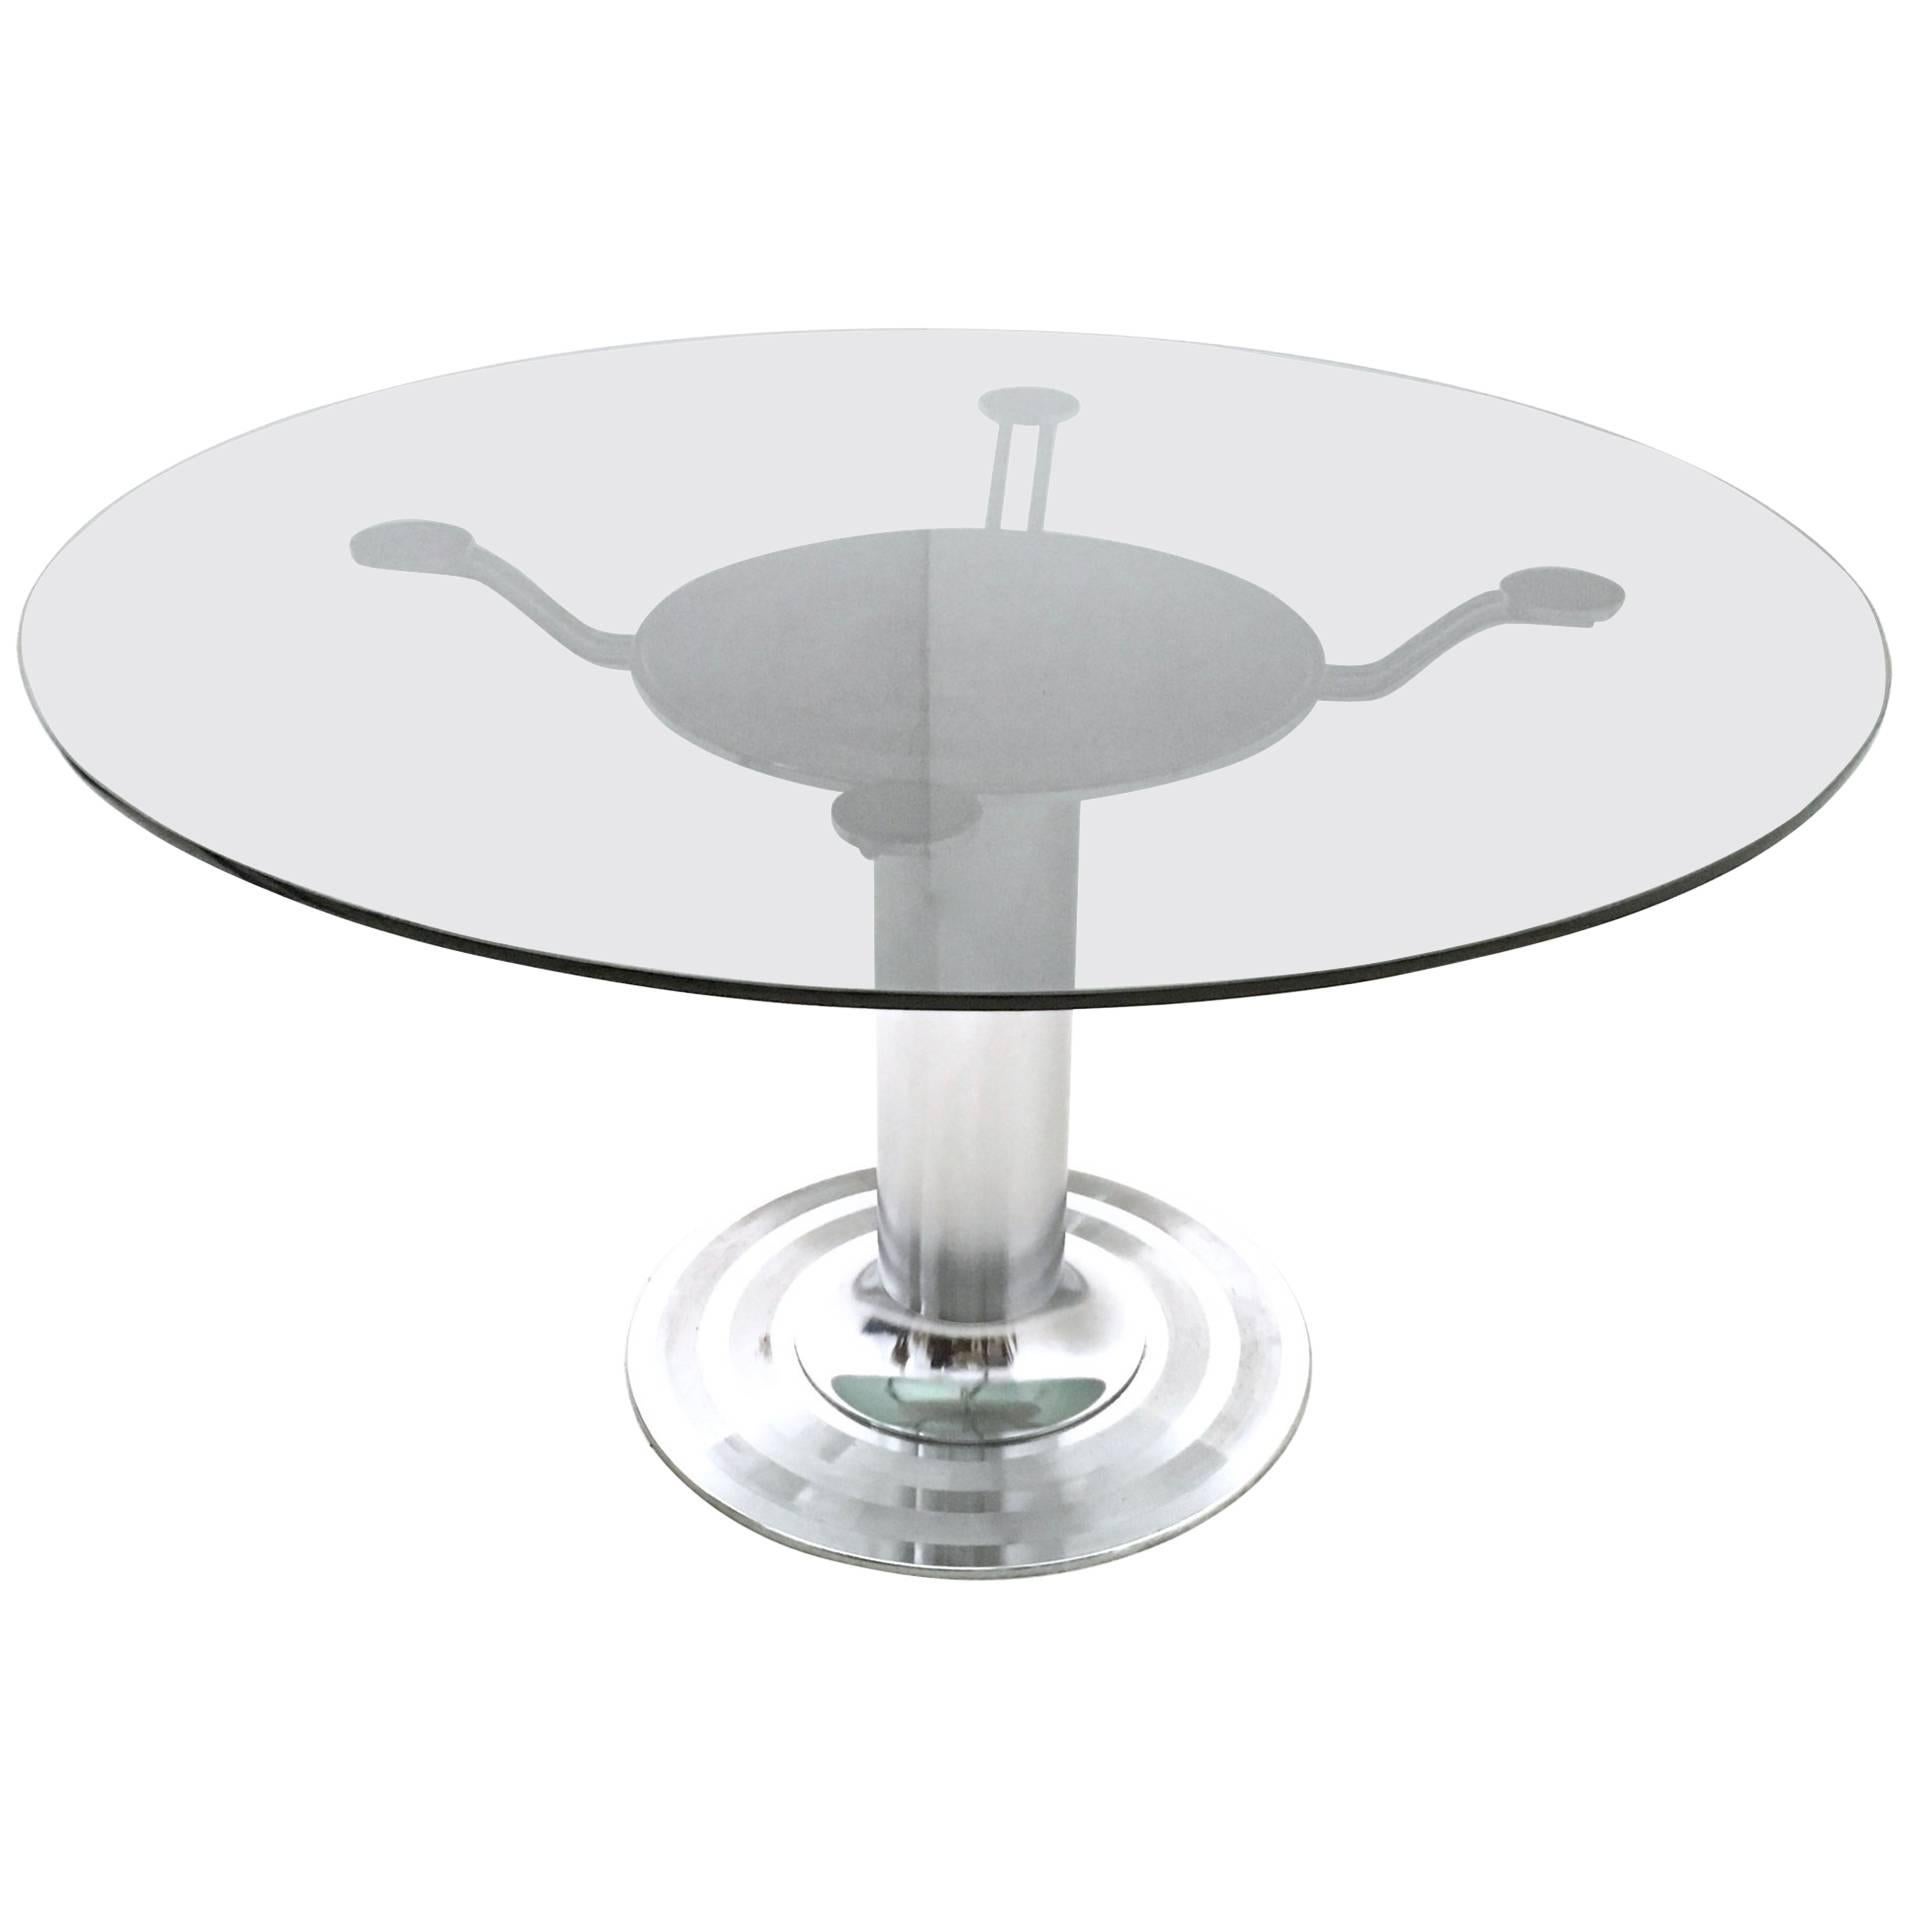 Made in Italy, 1970s.
It features a chrome-plated metal pedestal and a round tempered glass top. 
This 8- seat table is vintage, therefore it might show slight traces of use, but it is in such an excellent original condition, that it is ready to